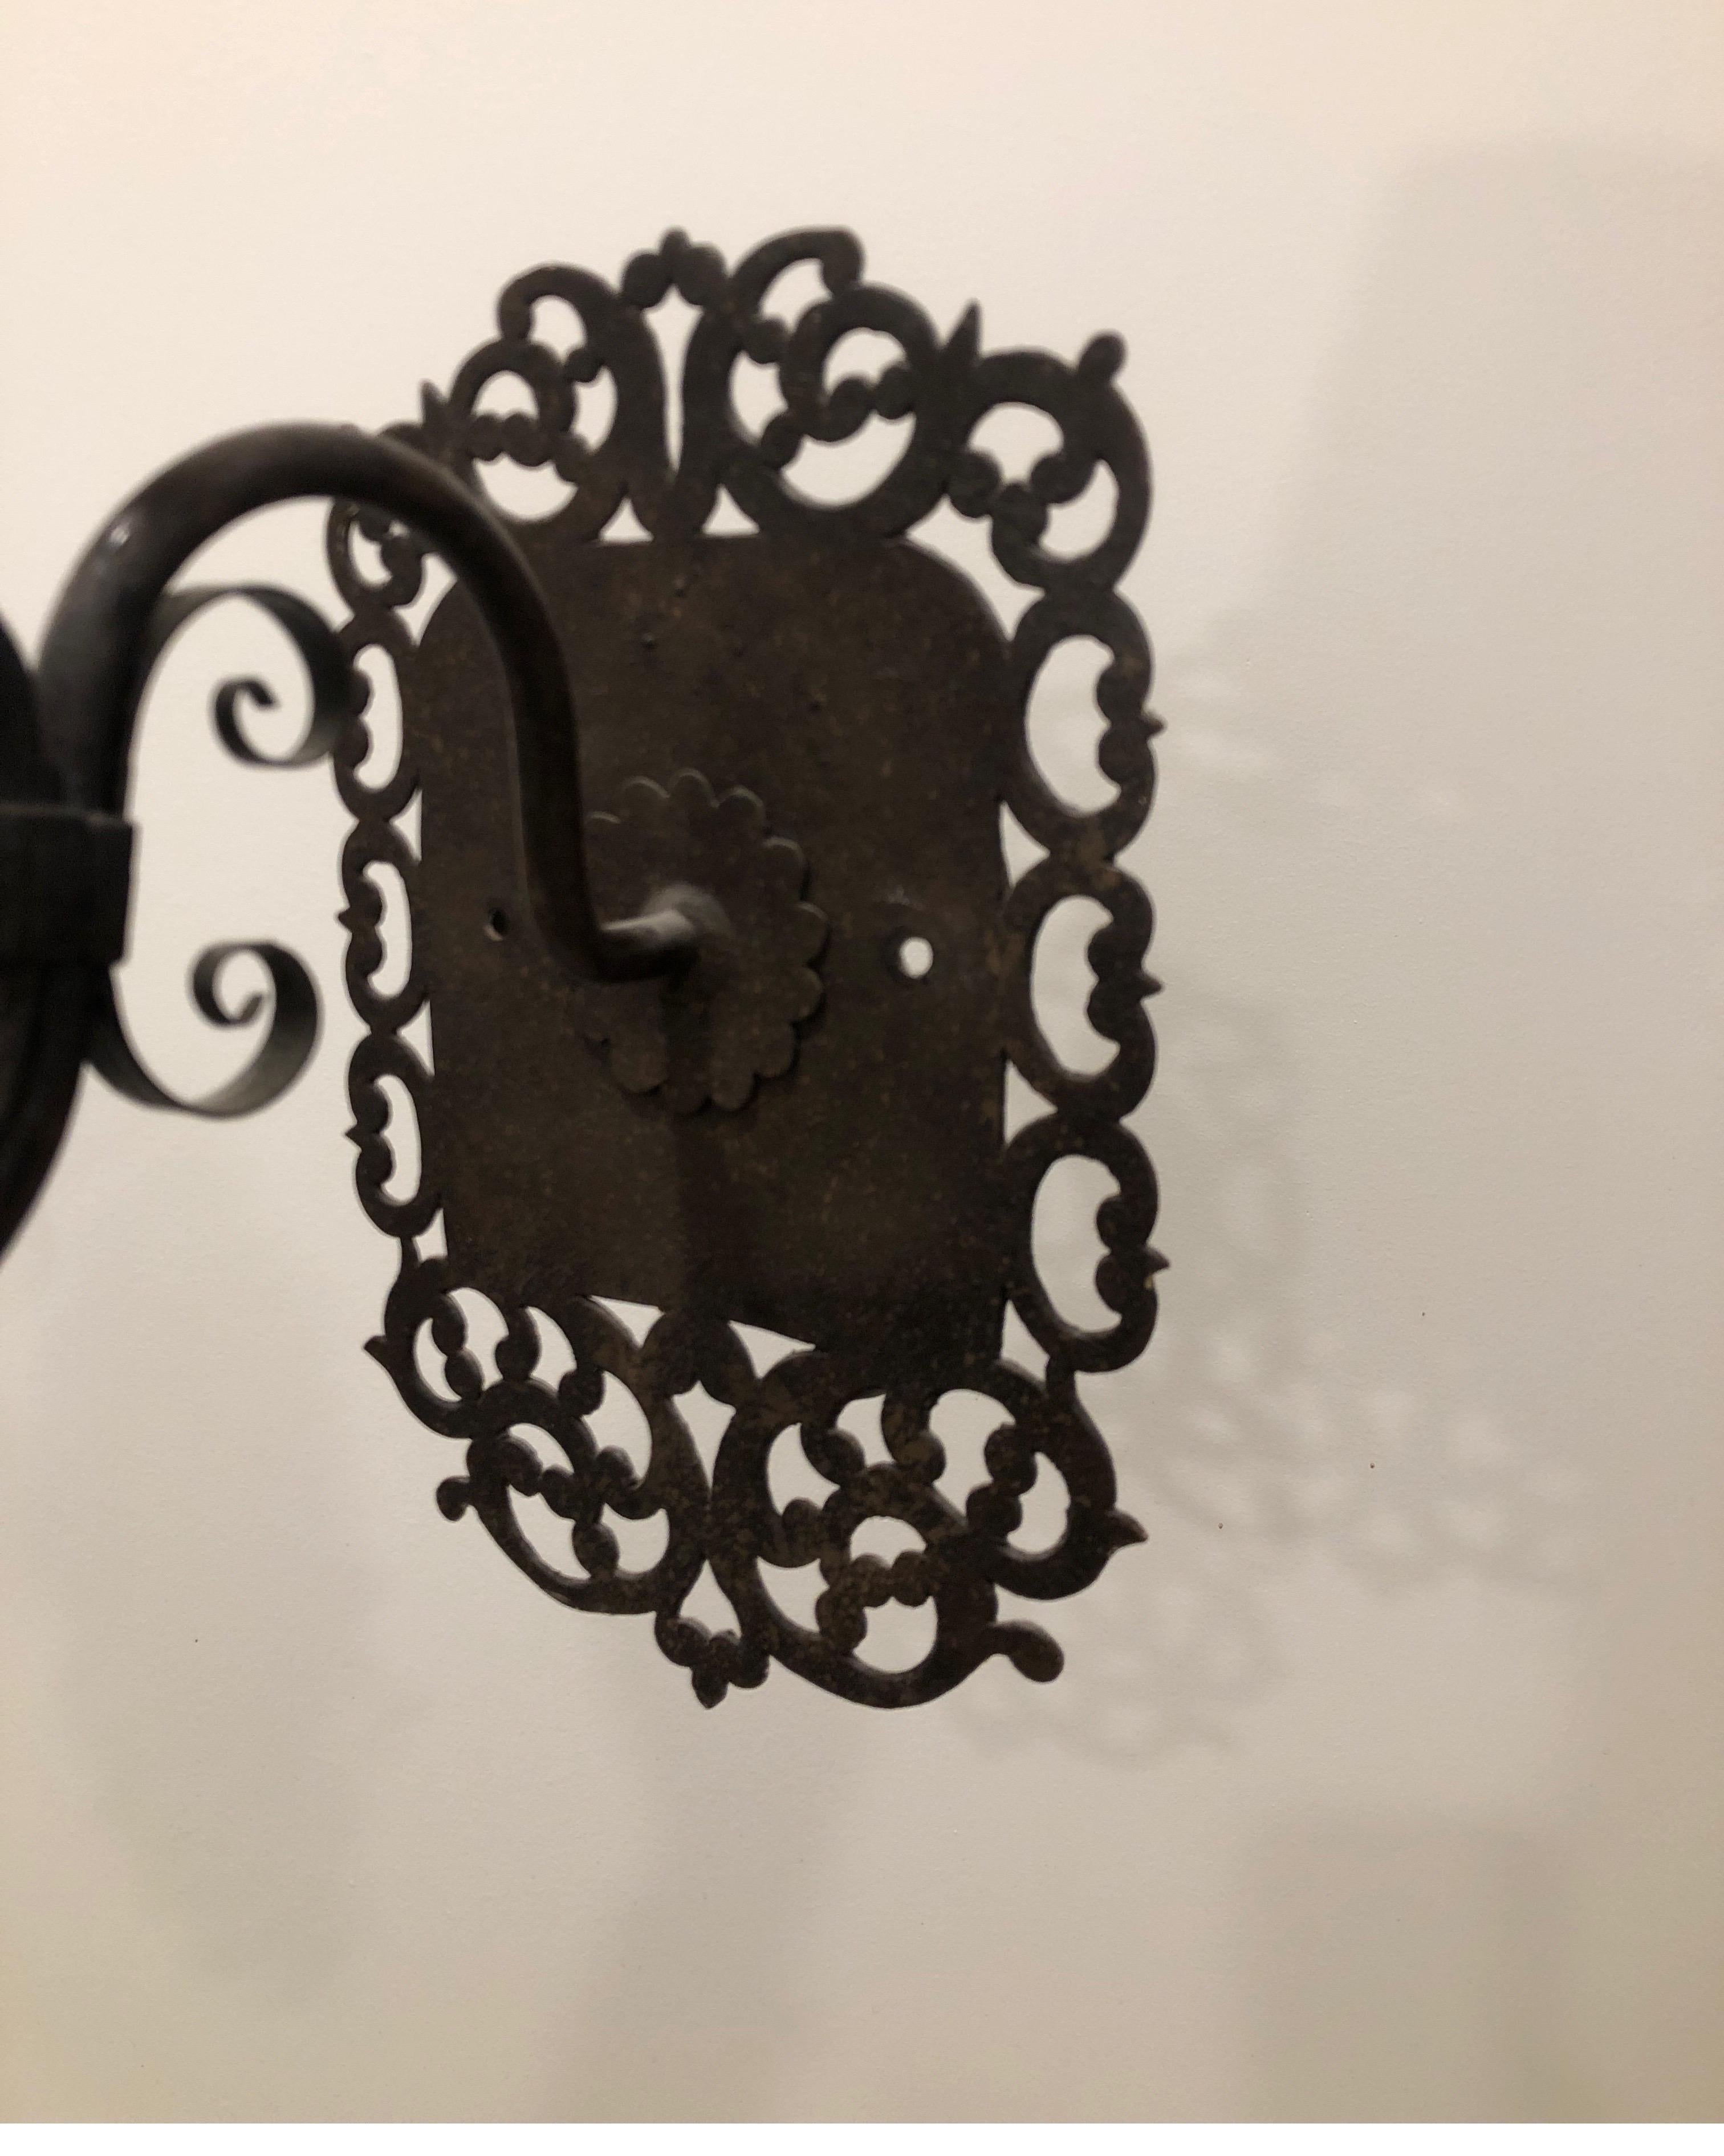 Two Pairs of Paul Ferrante iron sconces available. (We have a single 5th sconce available if needed)
Solid iron with one single light at the top. These sit off the wall about an Inch with a circle behind the rectangular backplate. 

See images